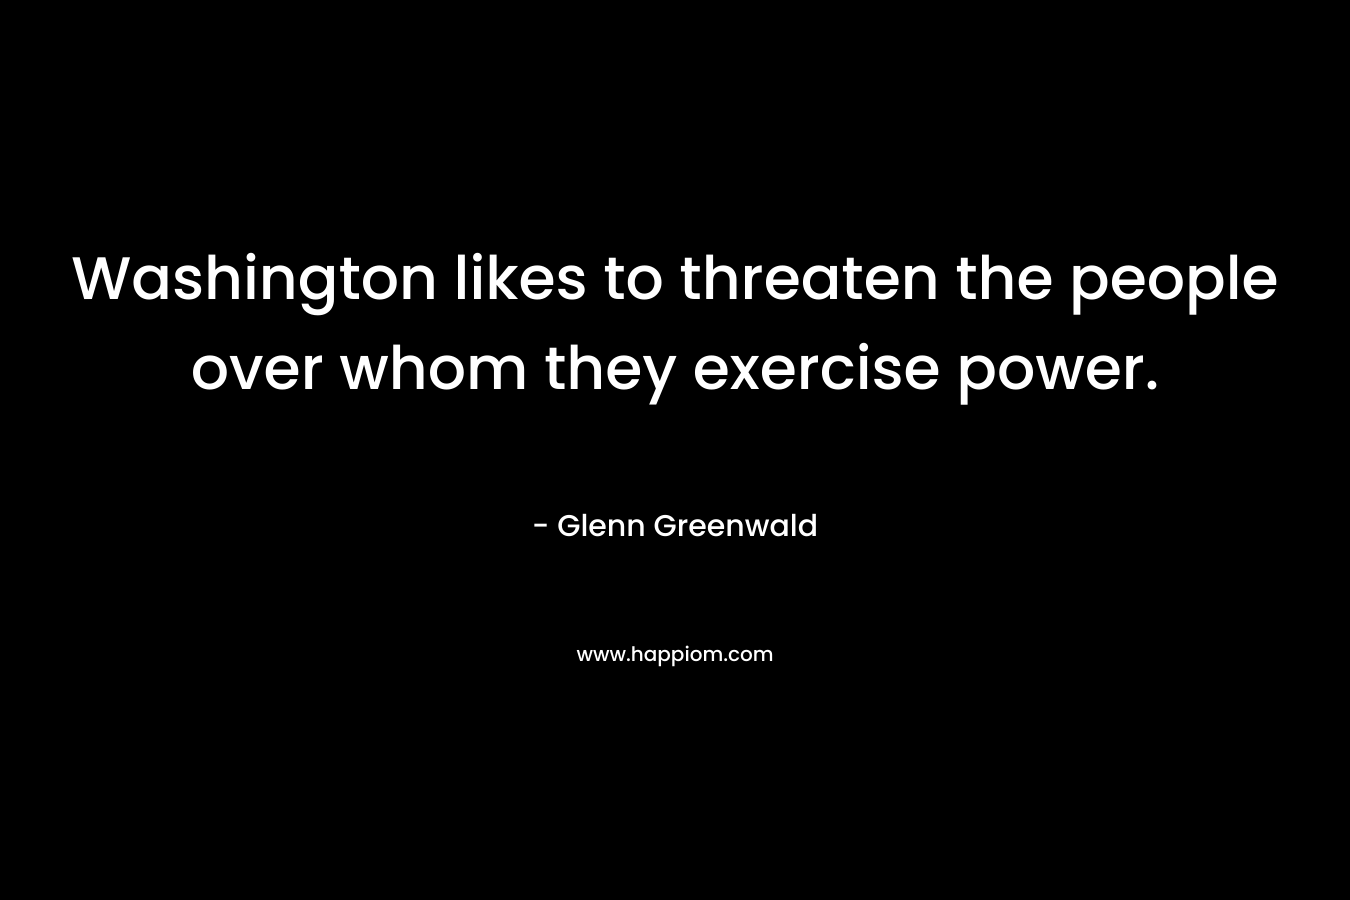 Washington likes to threaten the people over whom they exercise power.